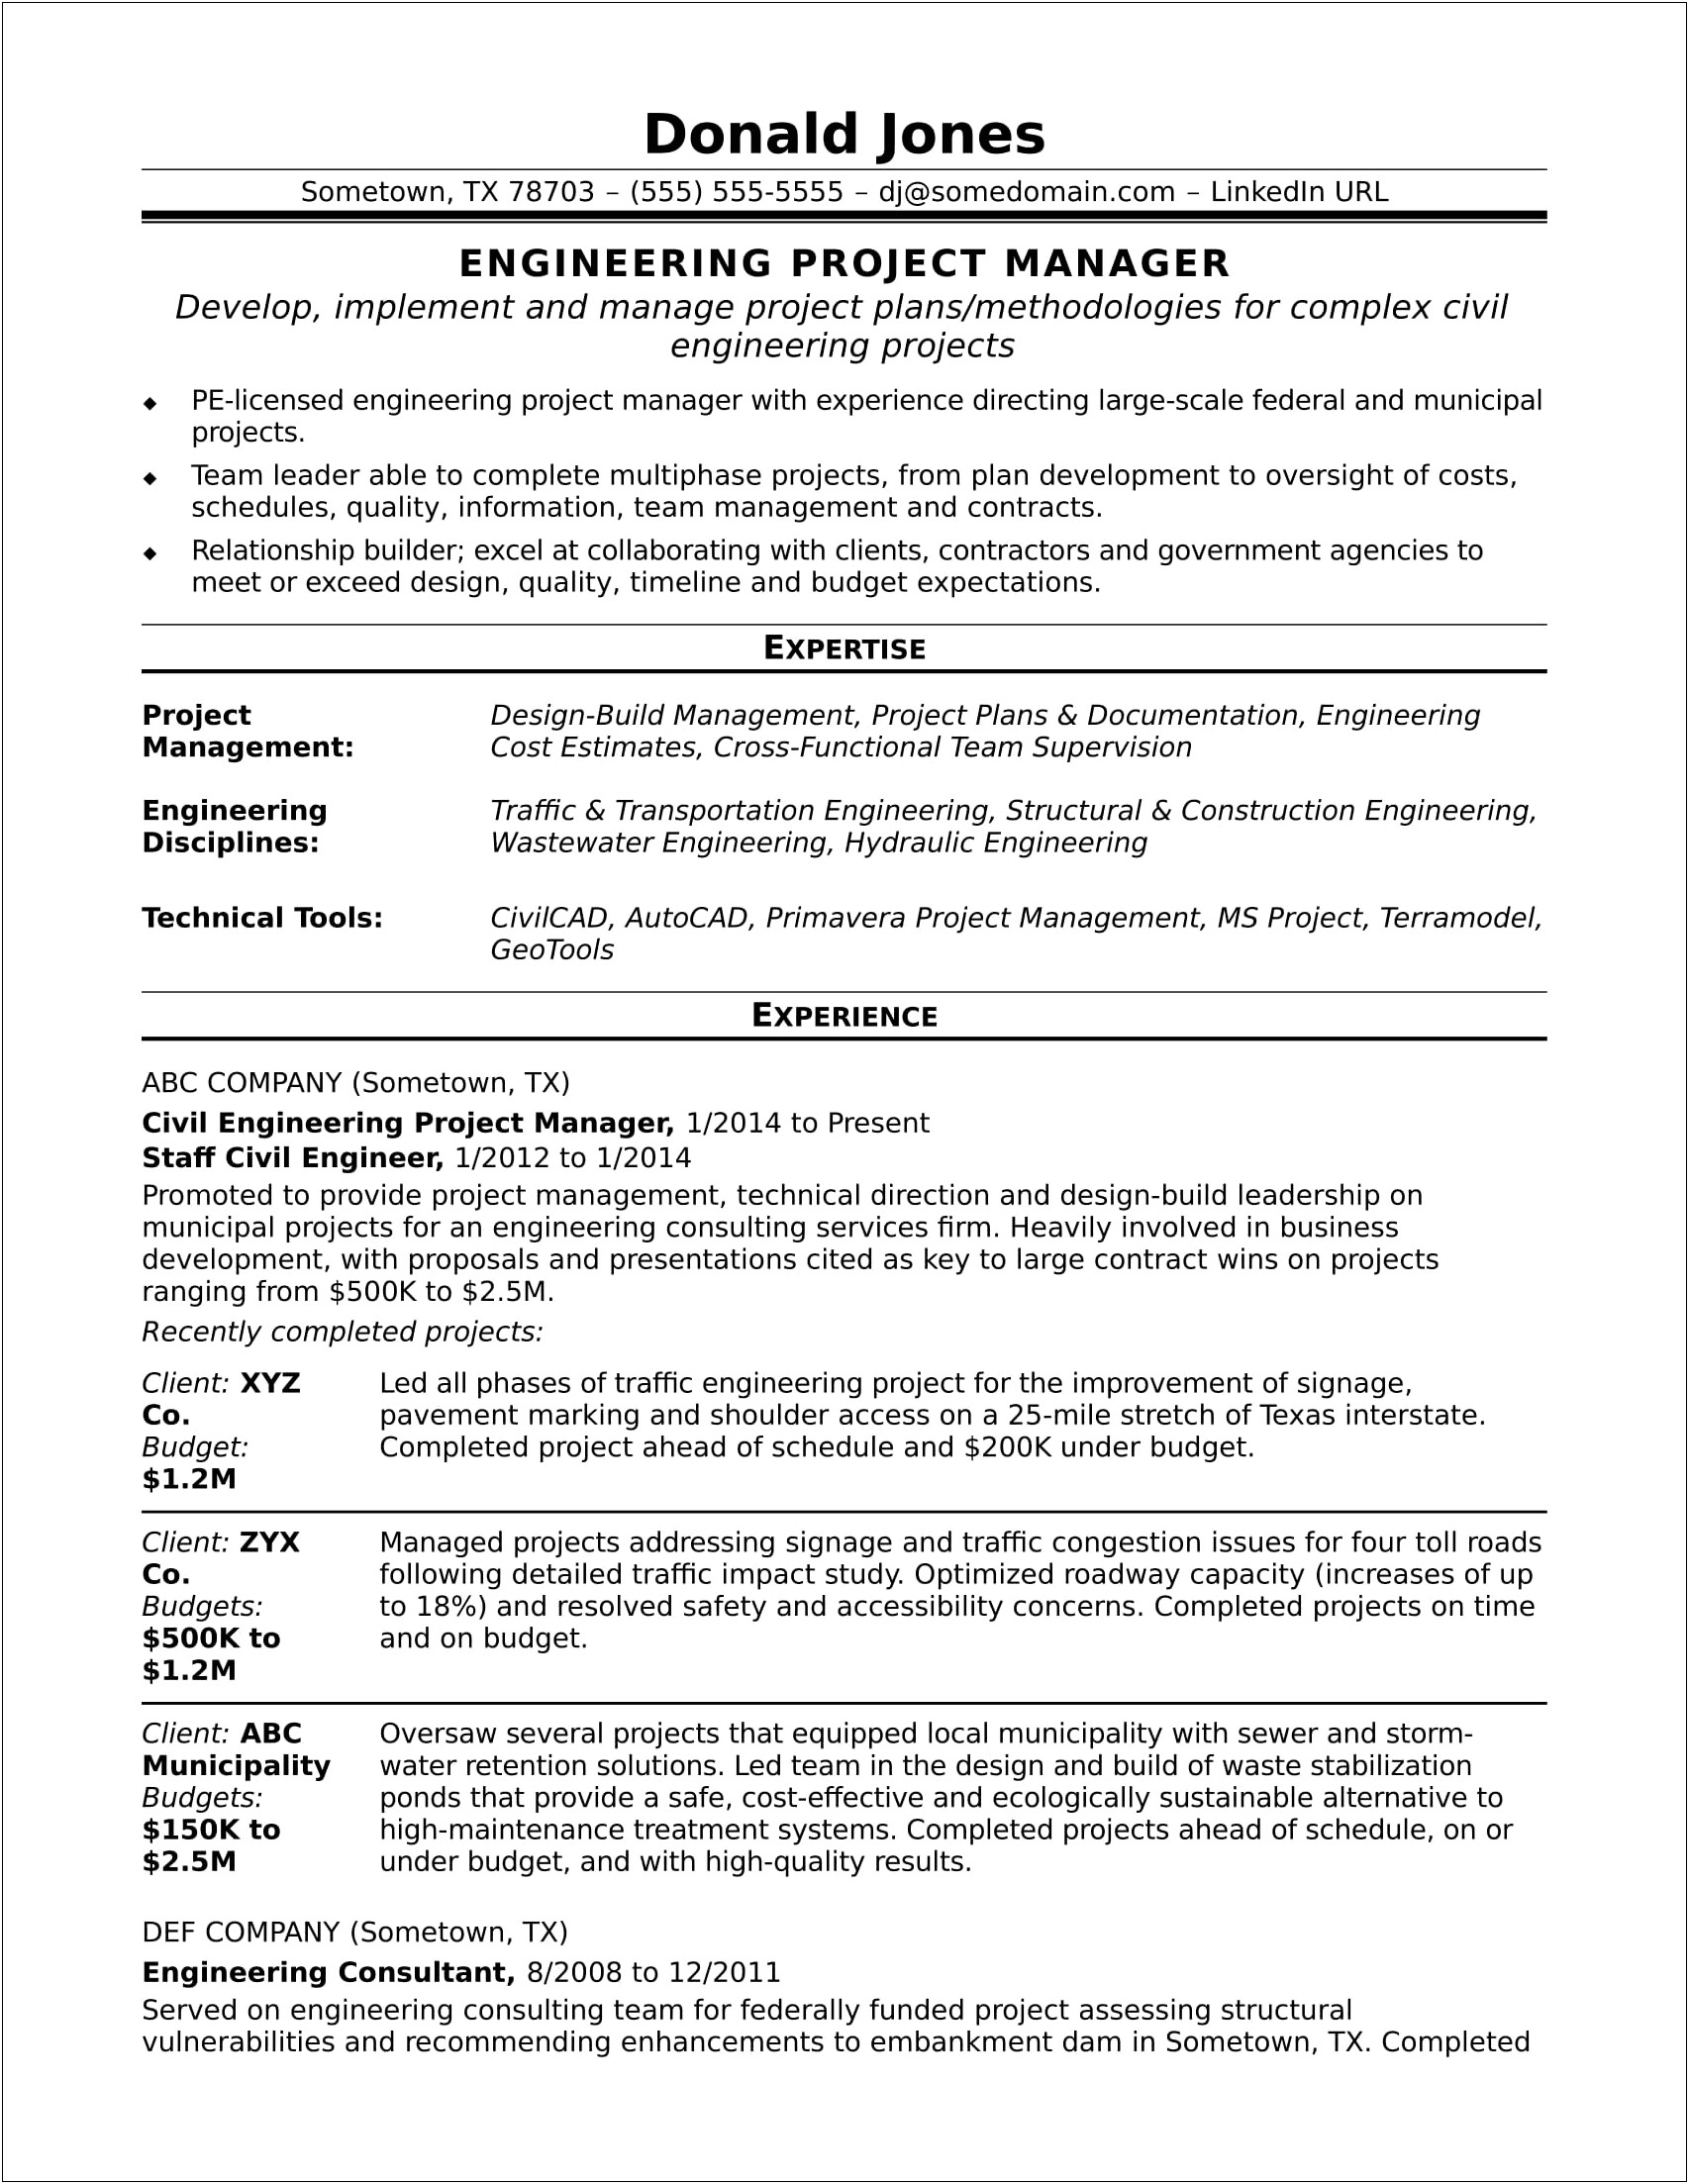 Project Manager Experience Description For Resume